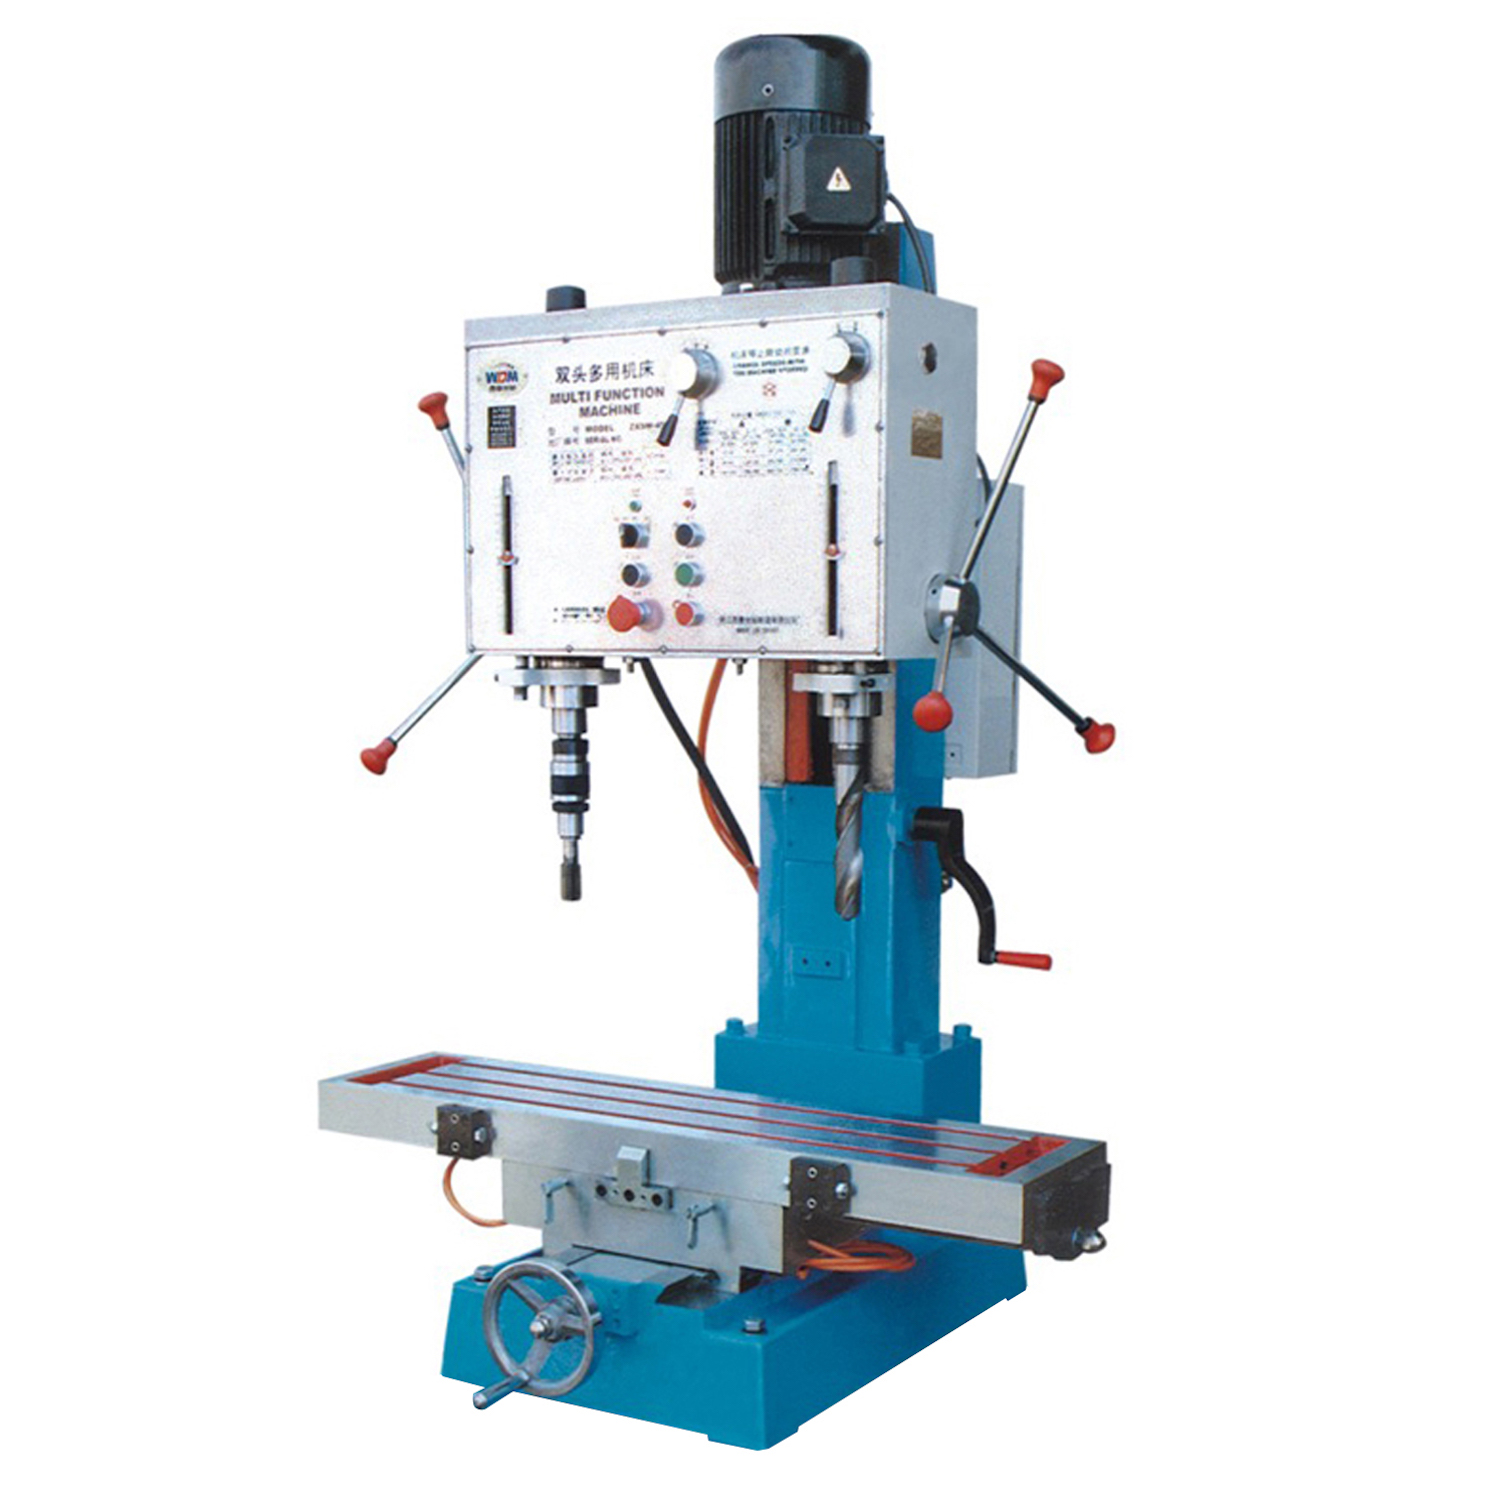 Xest Ling ZXSM45: Double Spindle, Drill:31mm, Tapping:M33